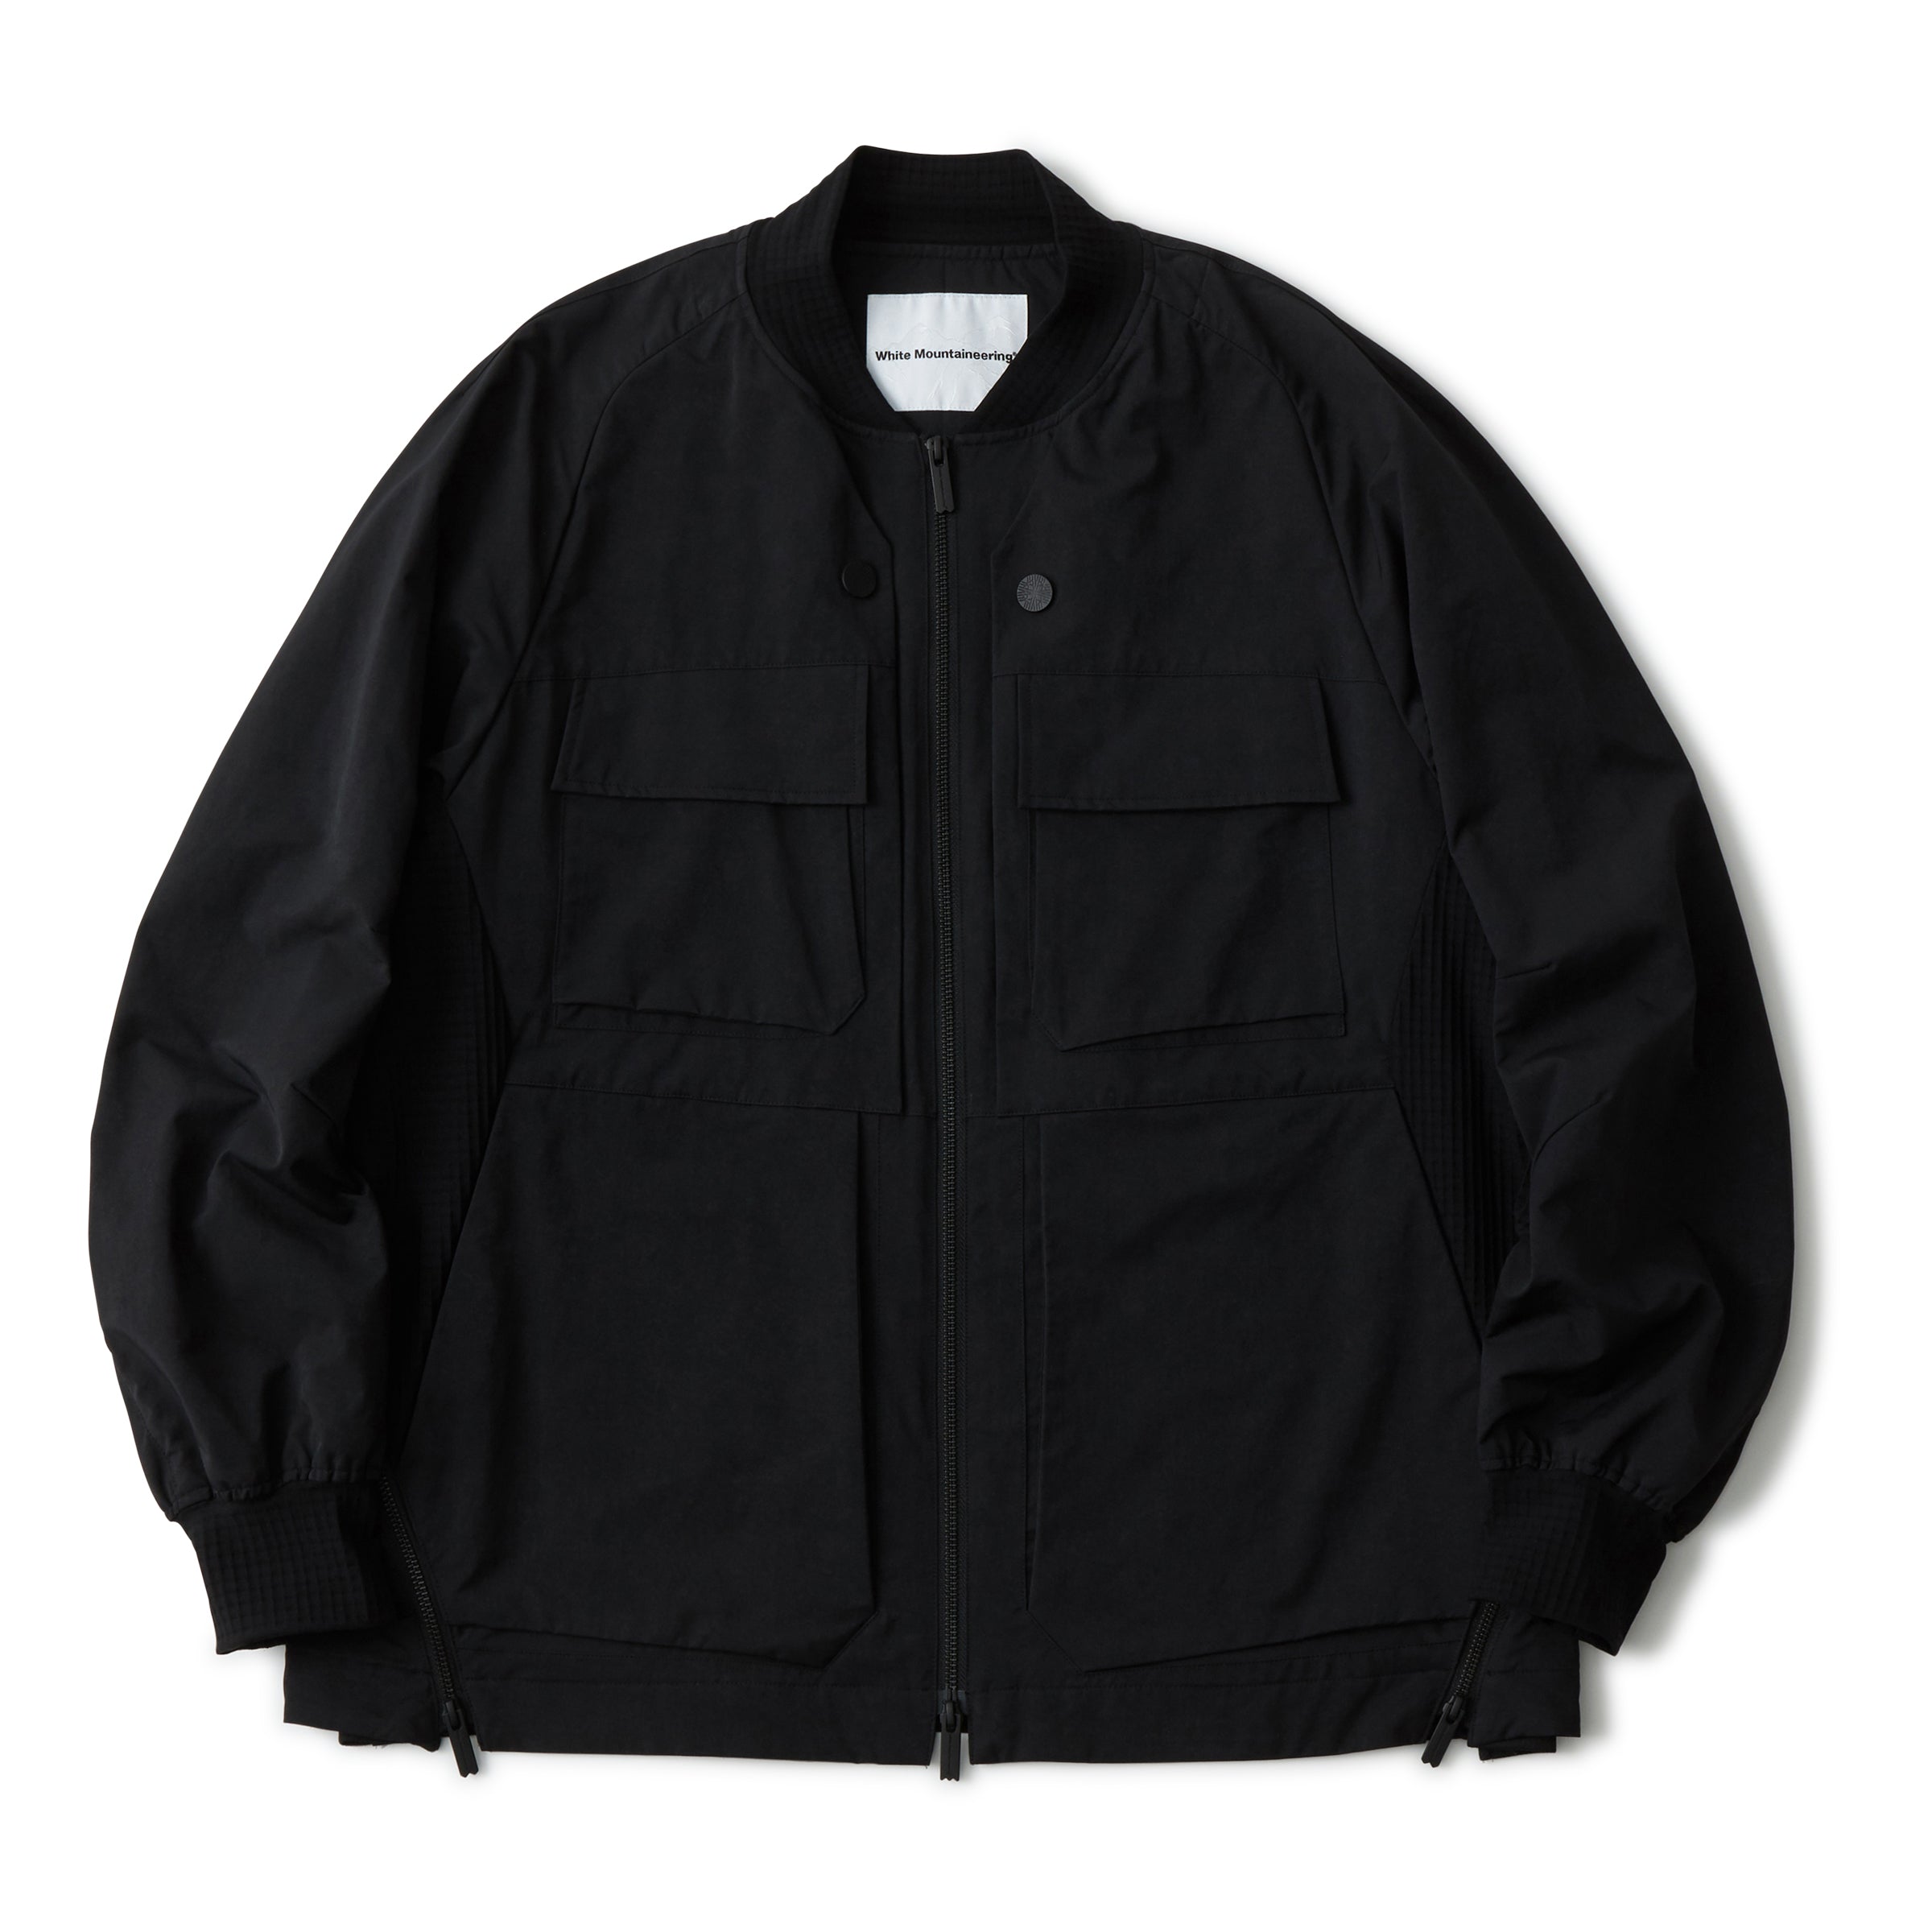 MULTI POCKET MA-1 JACKET – White Mountaineering OFFICIAL WEB SITE.